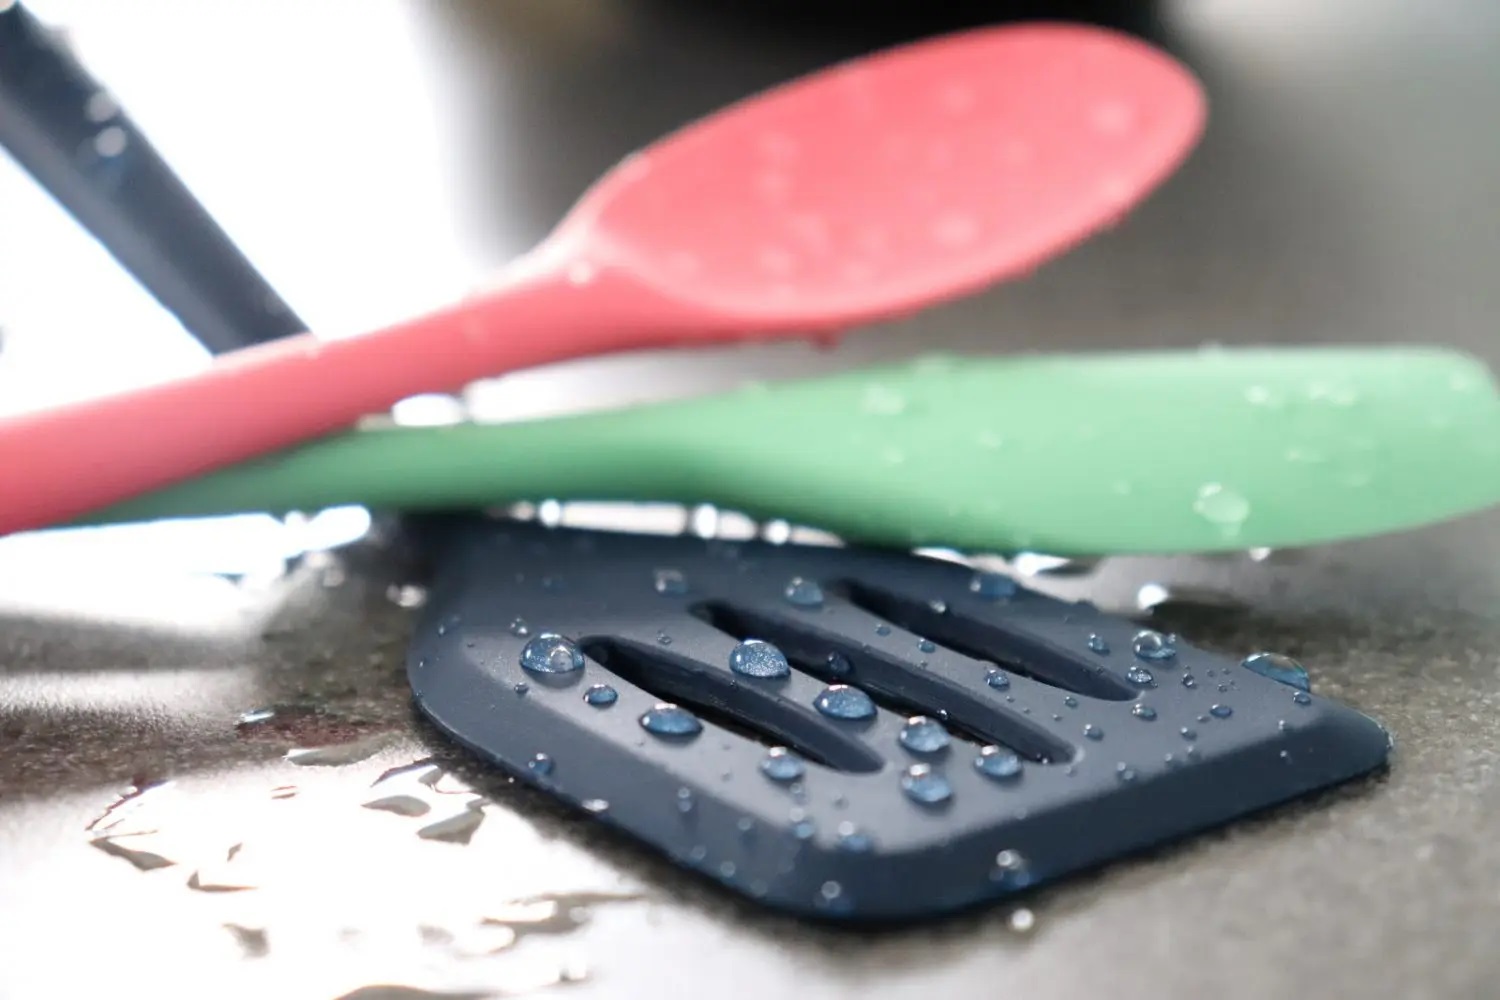 How To Clean A Silicone Spatula